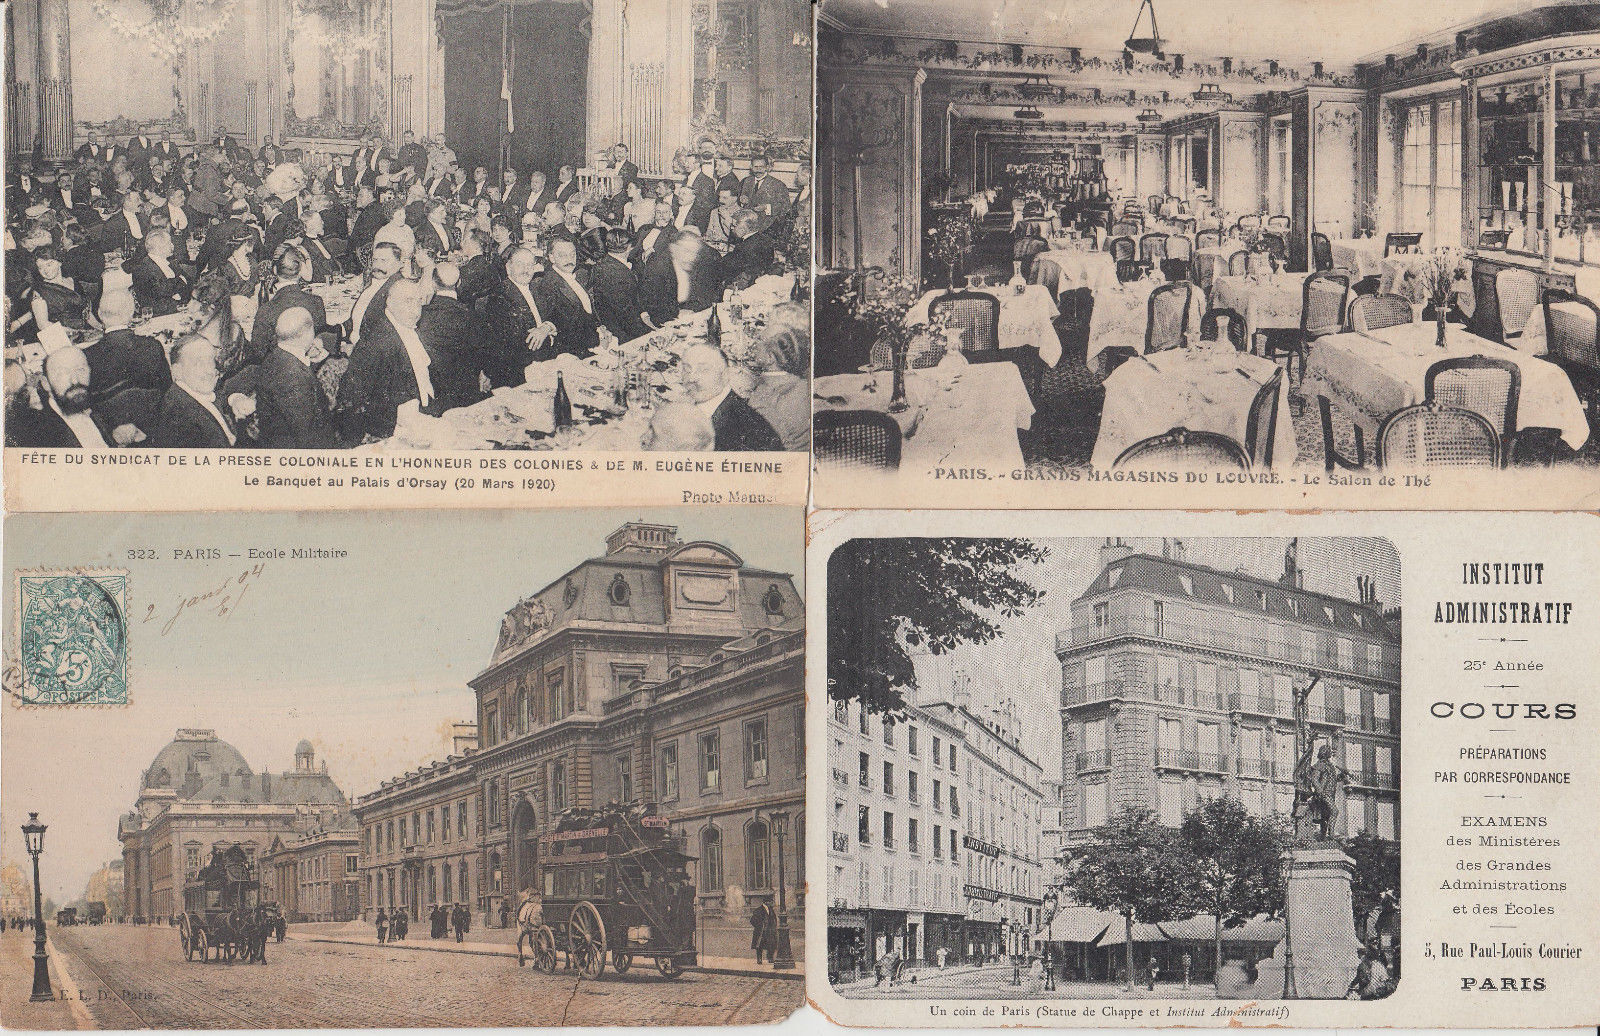 PARIS France 36 BETTER Postcards Mostly pre-1940 ALL POOR CONDITION (L5890)